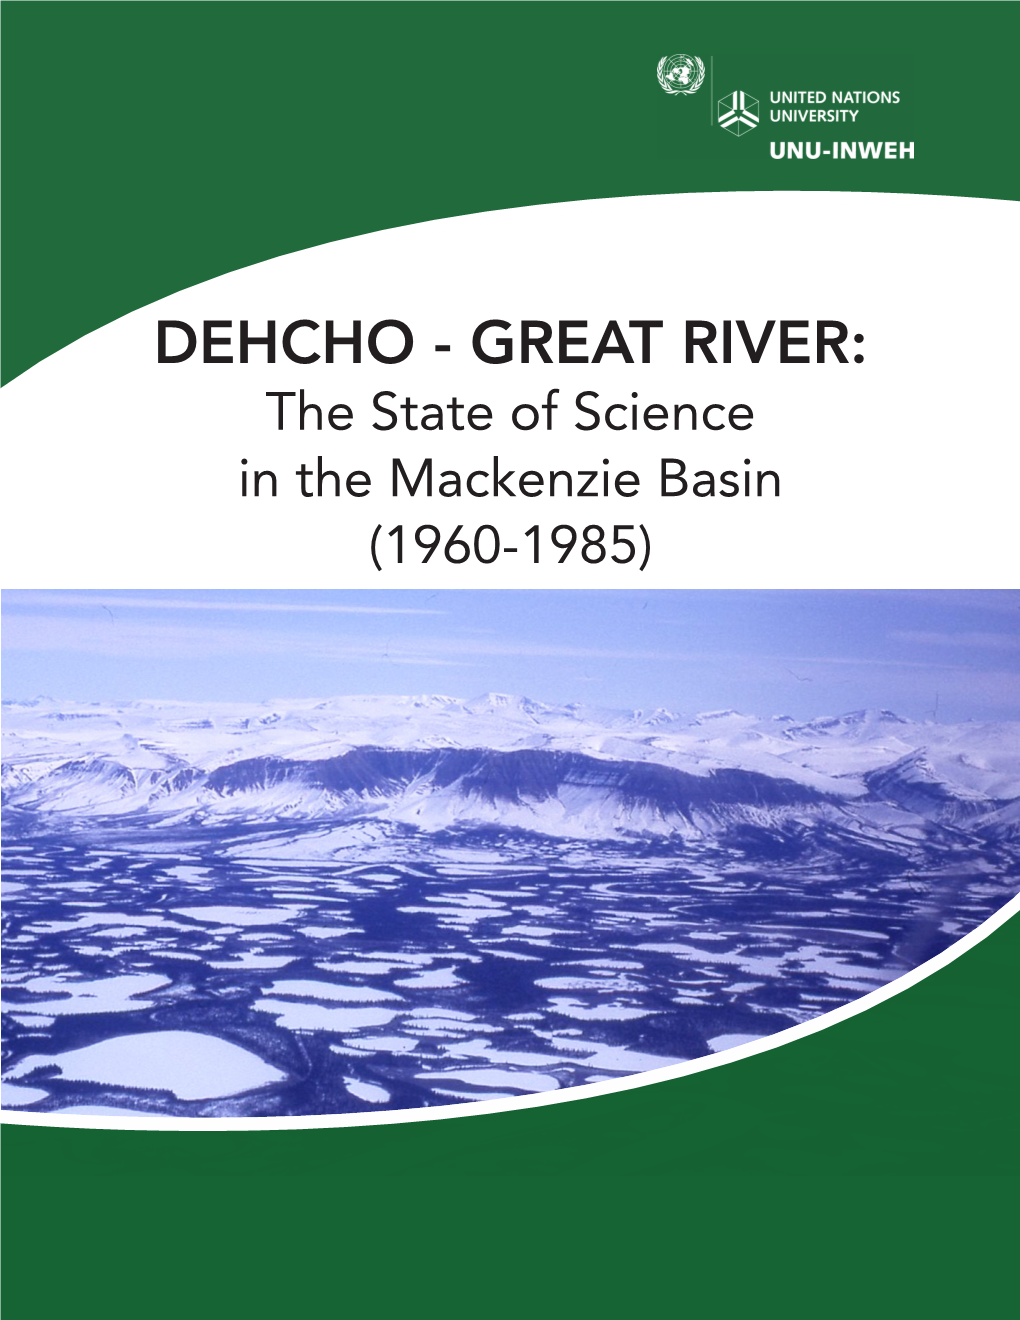 DEHCHO - GREAT RIVER: the State of Science in the Mackenzie Basin (1960-1985) Contributing Authors: Corinne Schuster-Wallace, Kate Cave, and Chris Metcalfe